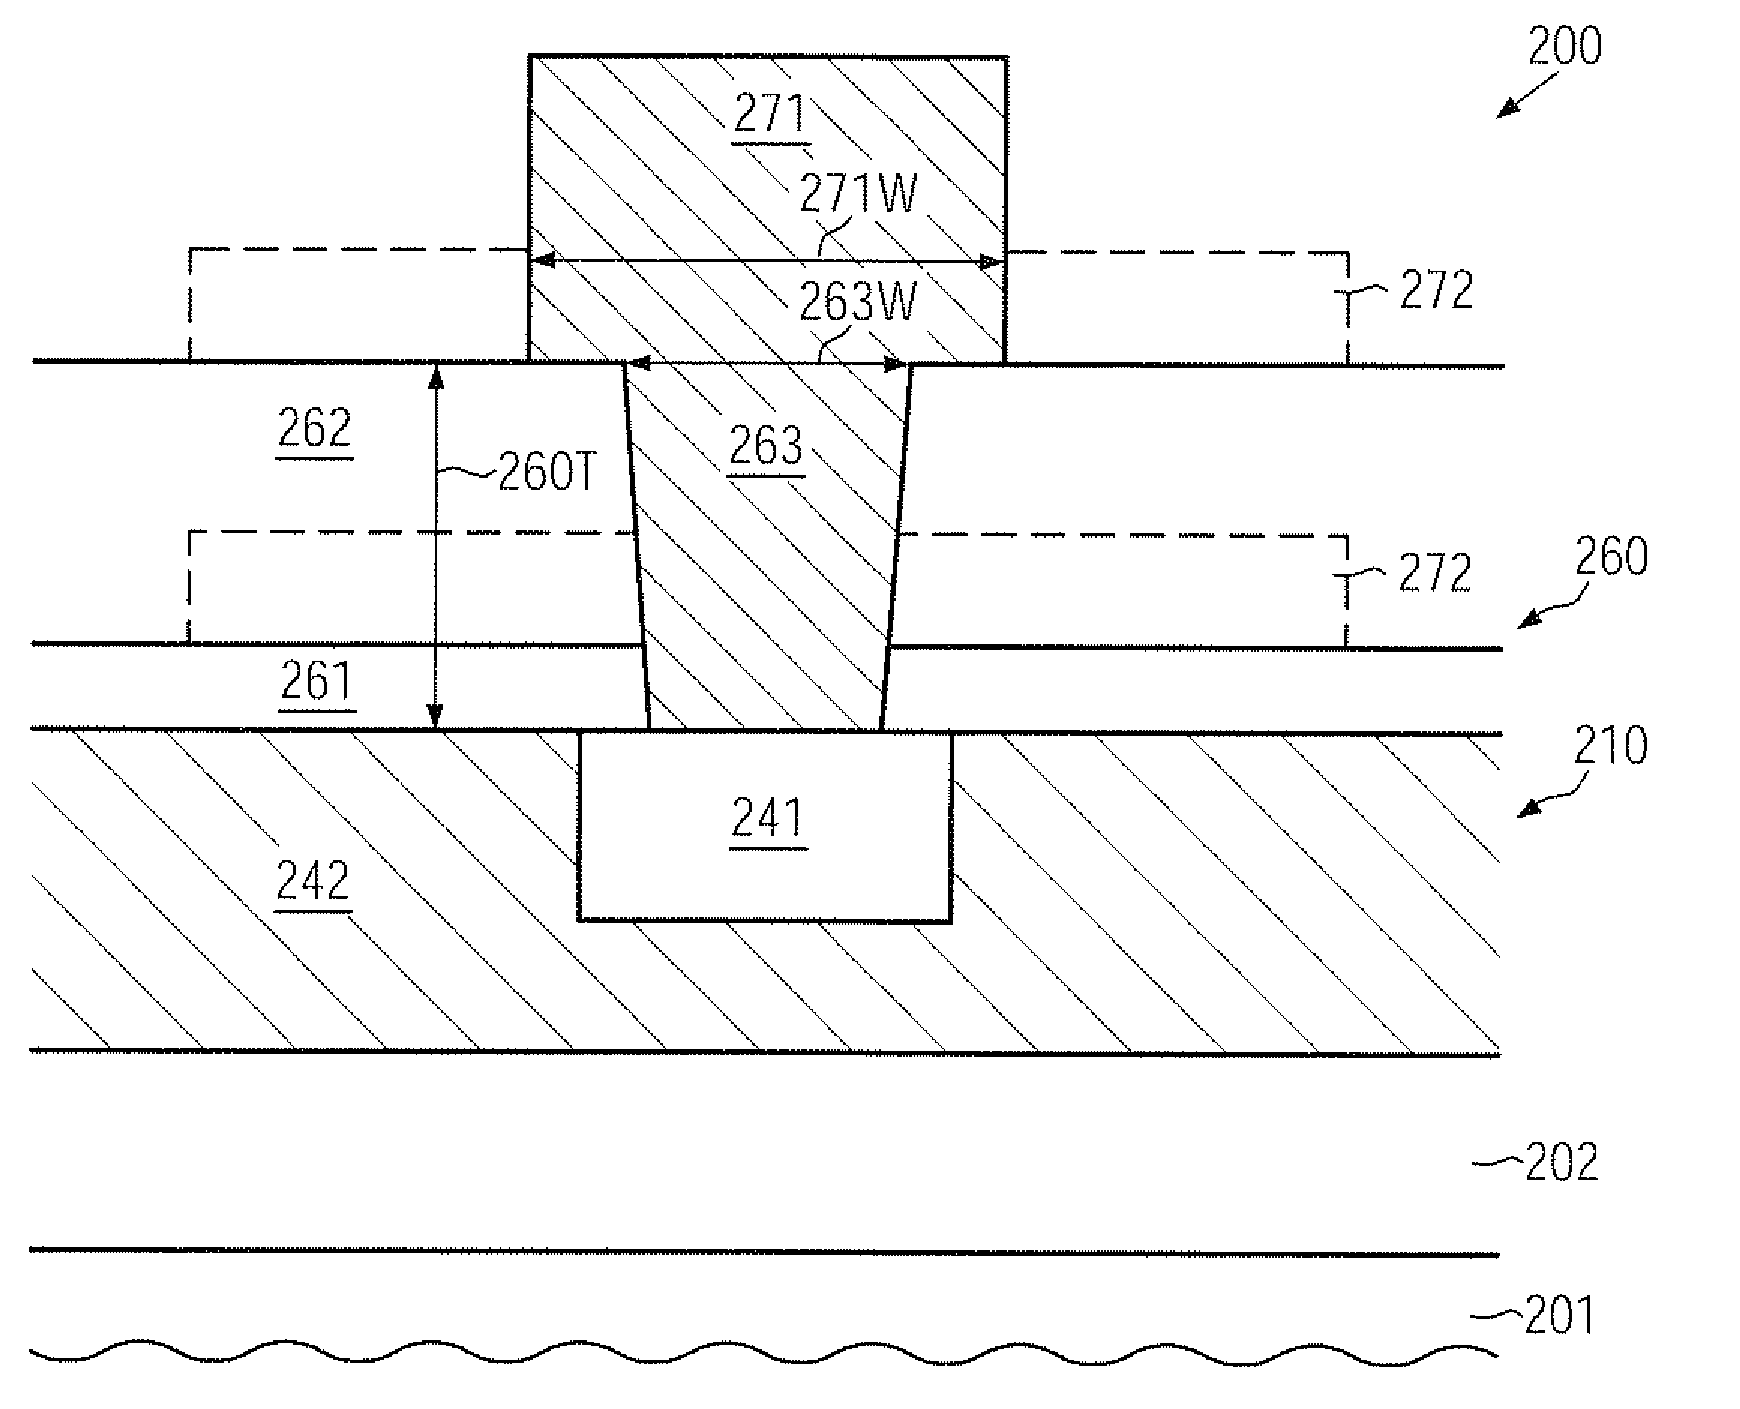 Semiconductor device including a reduced stress configuration for metal pillars